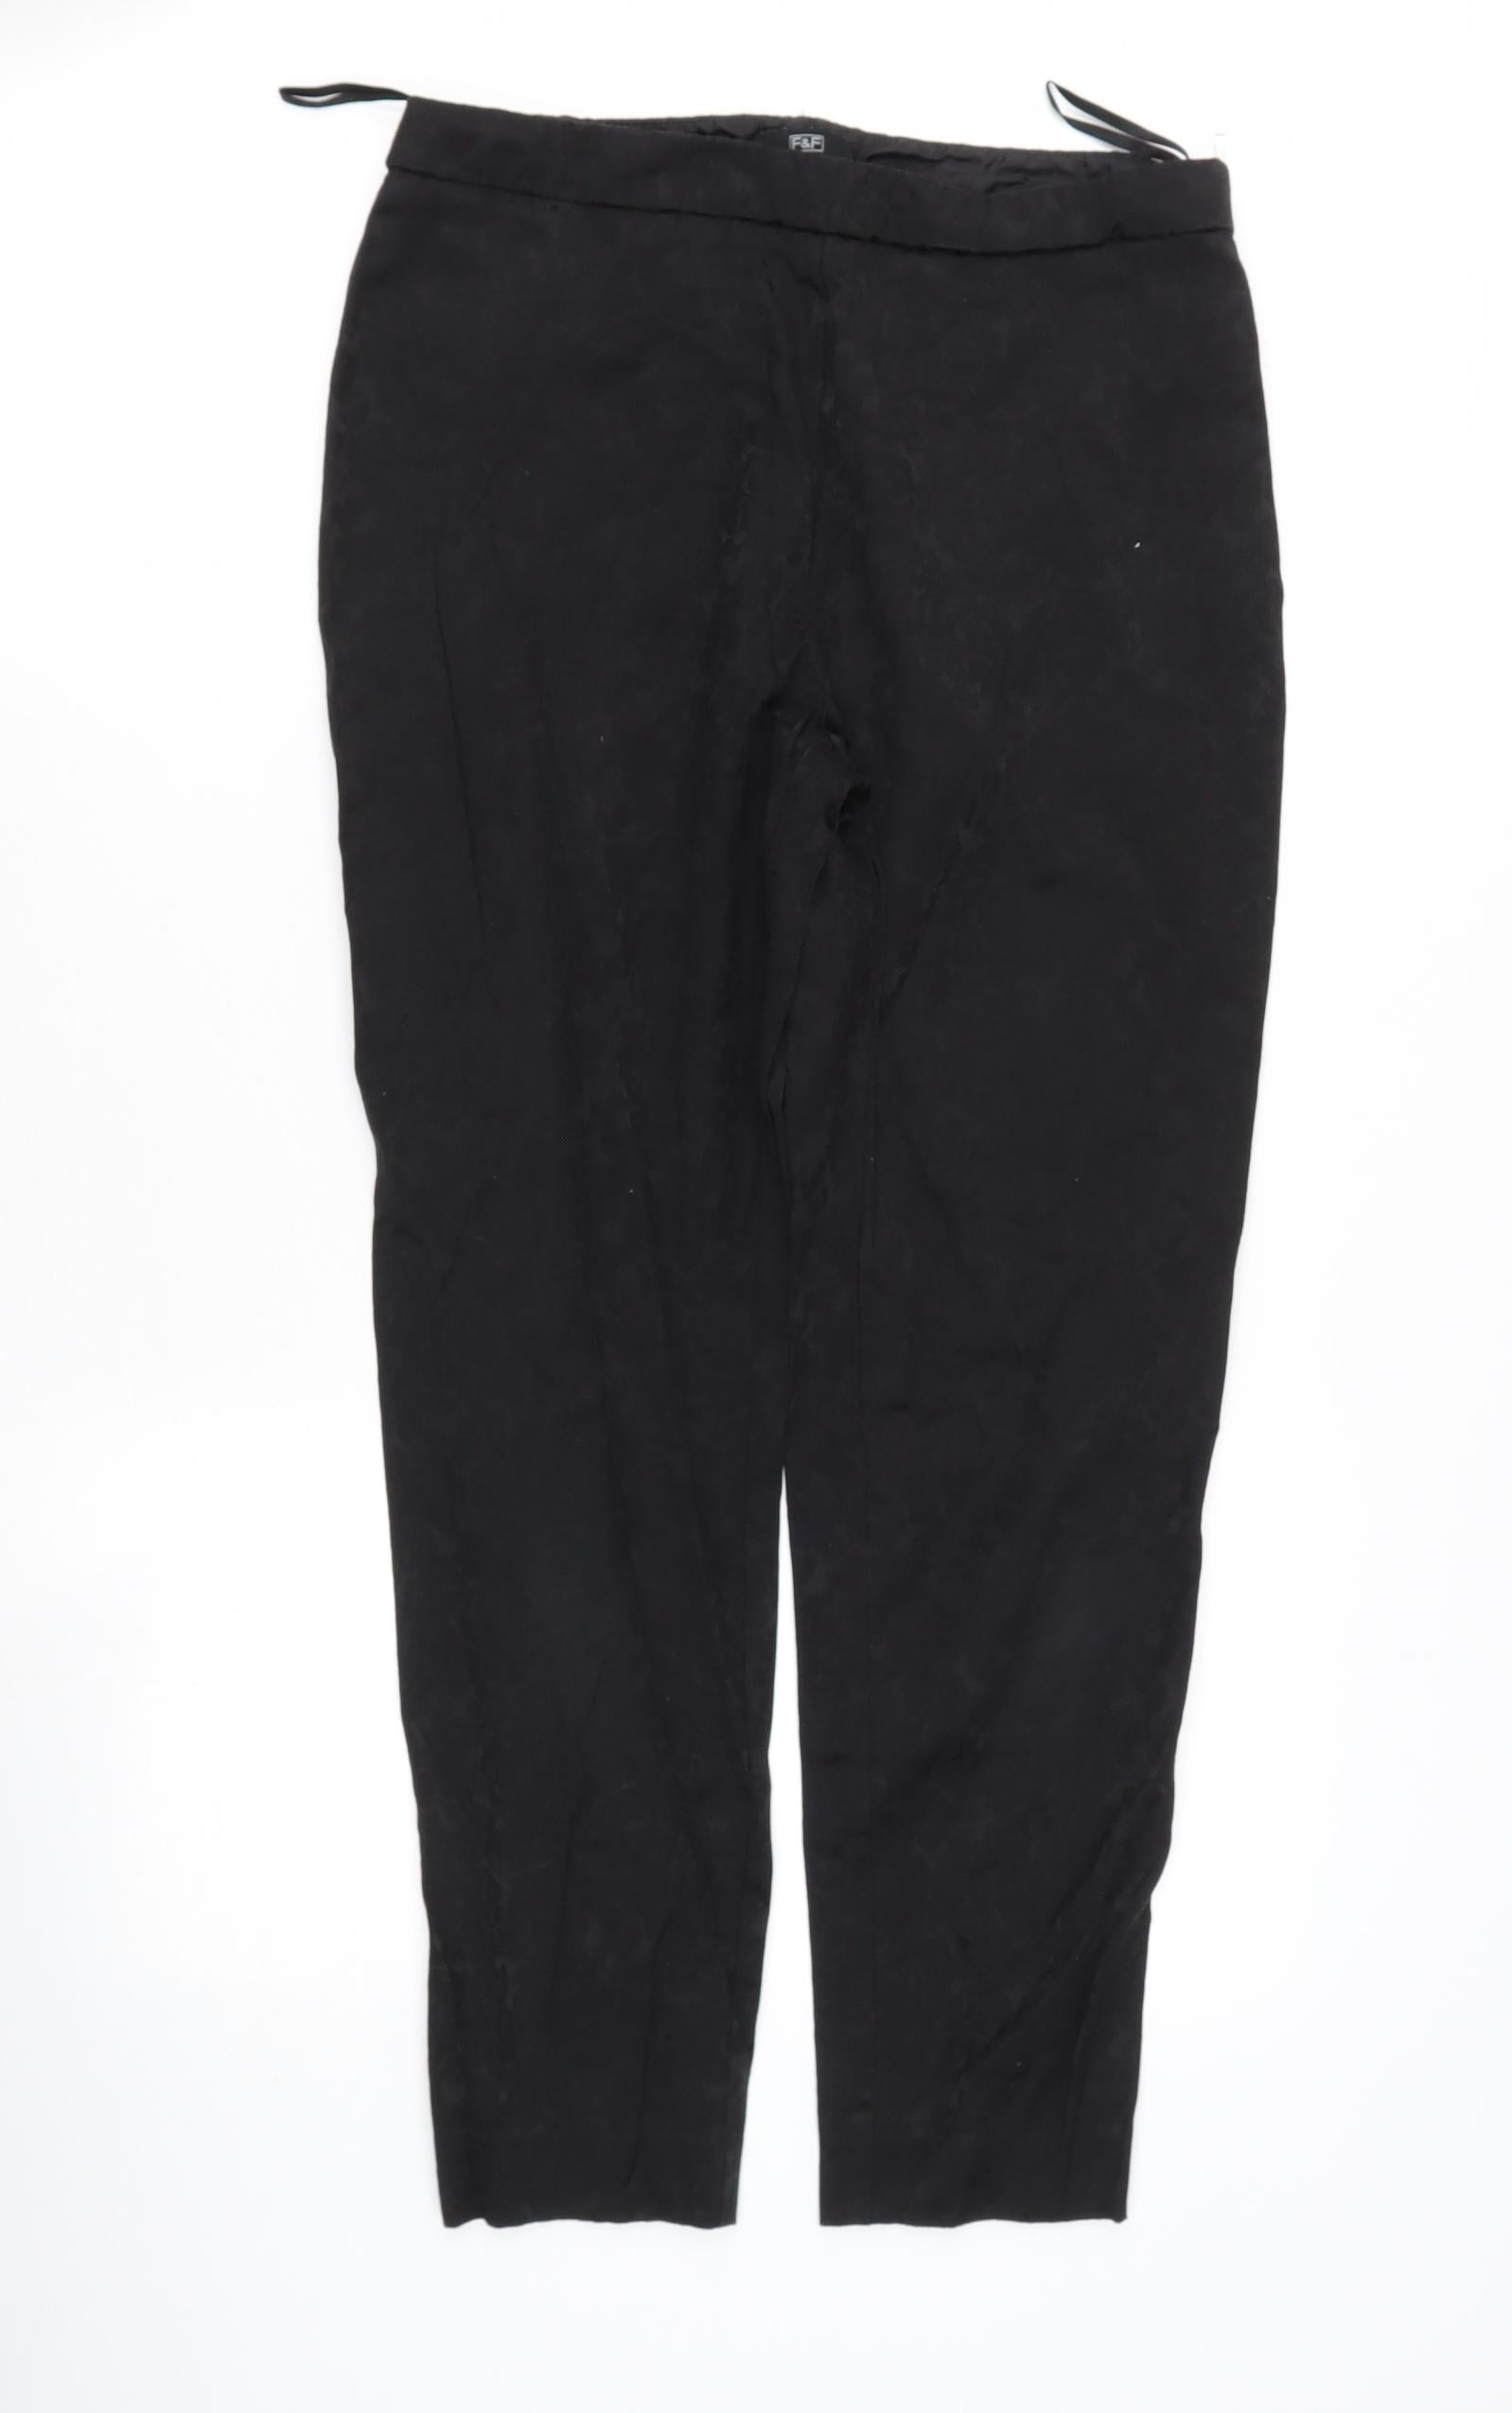 FLORENCE AND FRED FampF TESCO LADIES WOMENS BLACK WORK TROUSERS PANTS  SIZE 12 L27  eBay